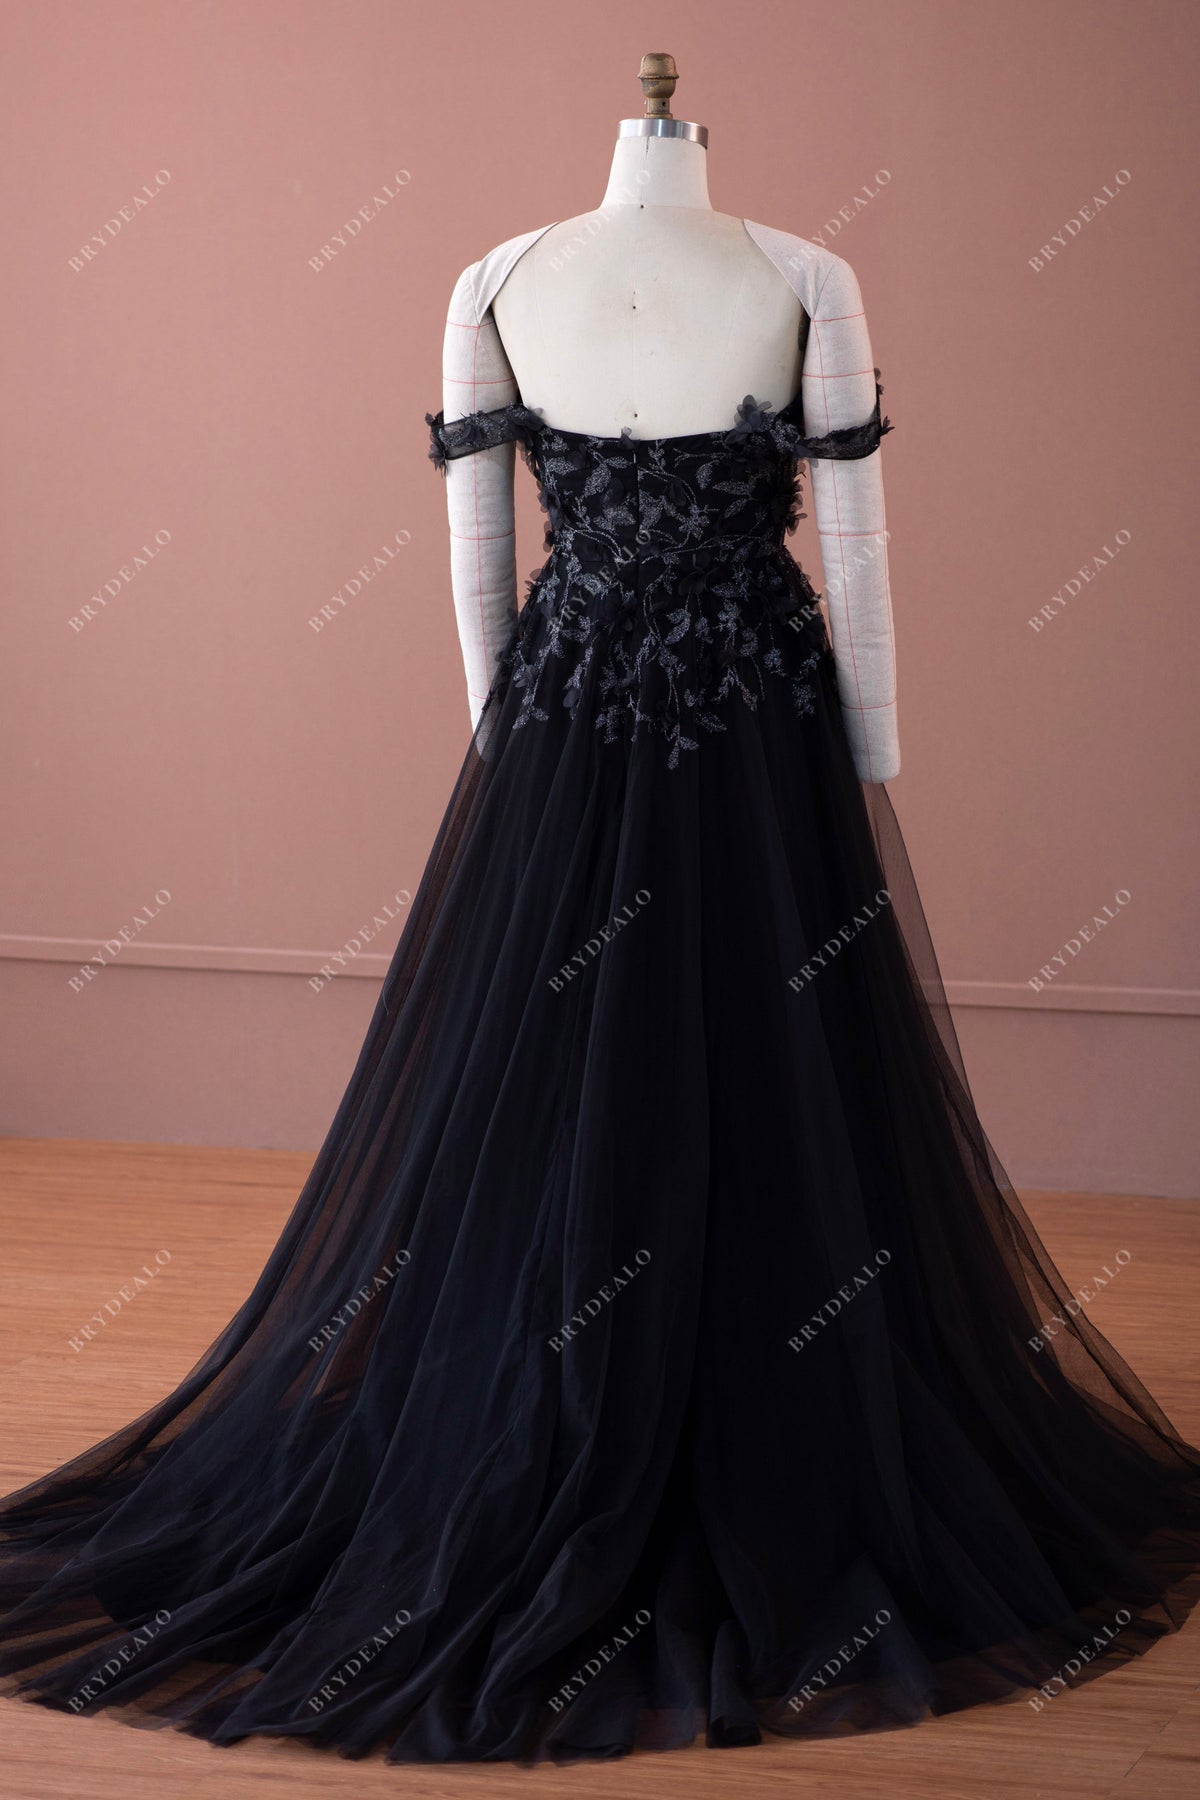 Black Off-shoulder Sweetheart Flower Lace Tulle Wedding Gown